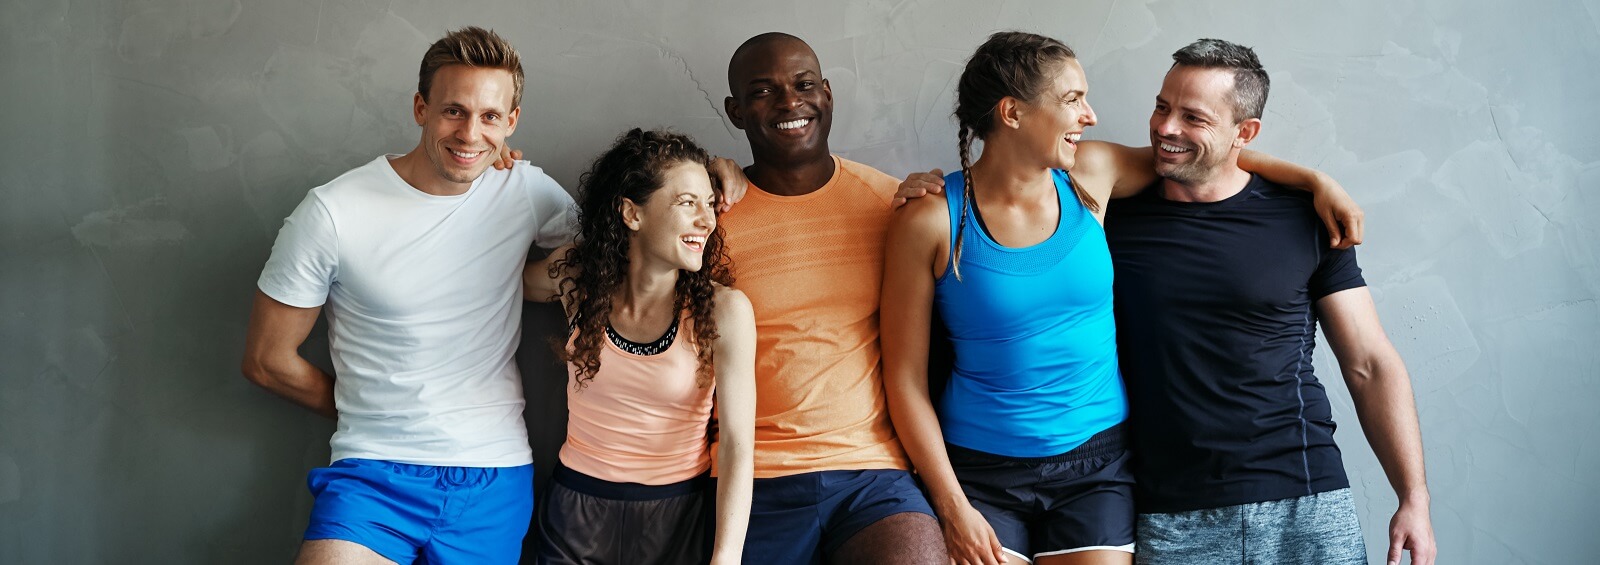 Diverse Group Of Laughing Friends Standing Together At The Gym